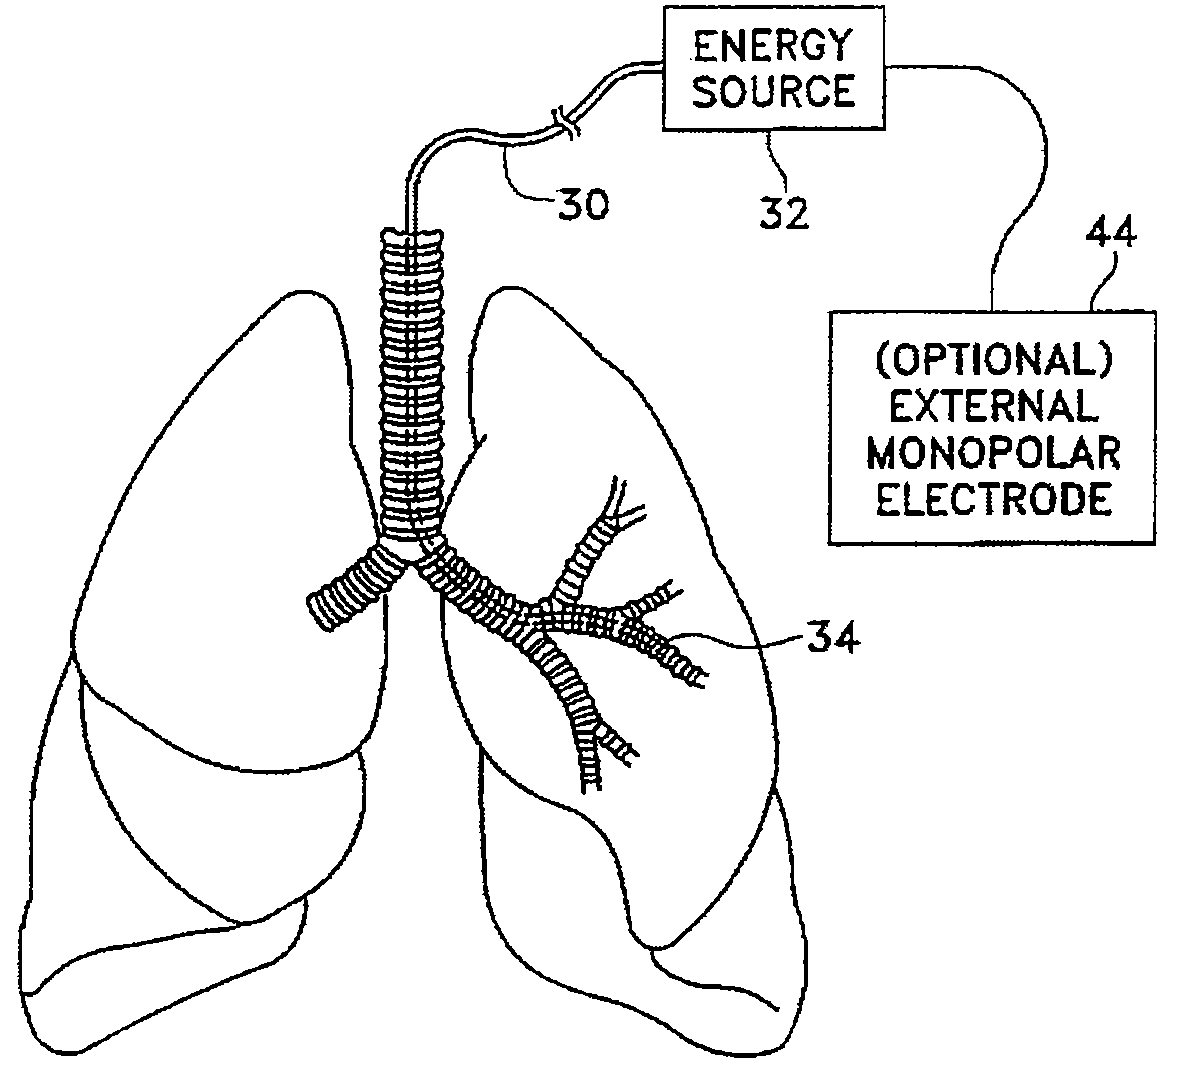 Bipolar devices for modification of airways by transfer of energy